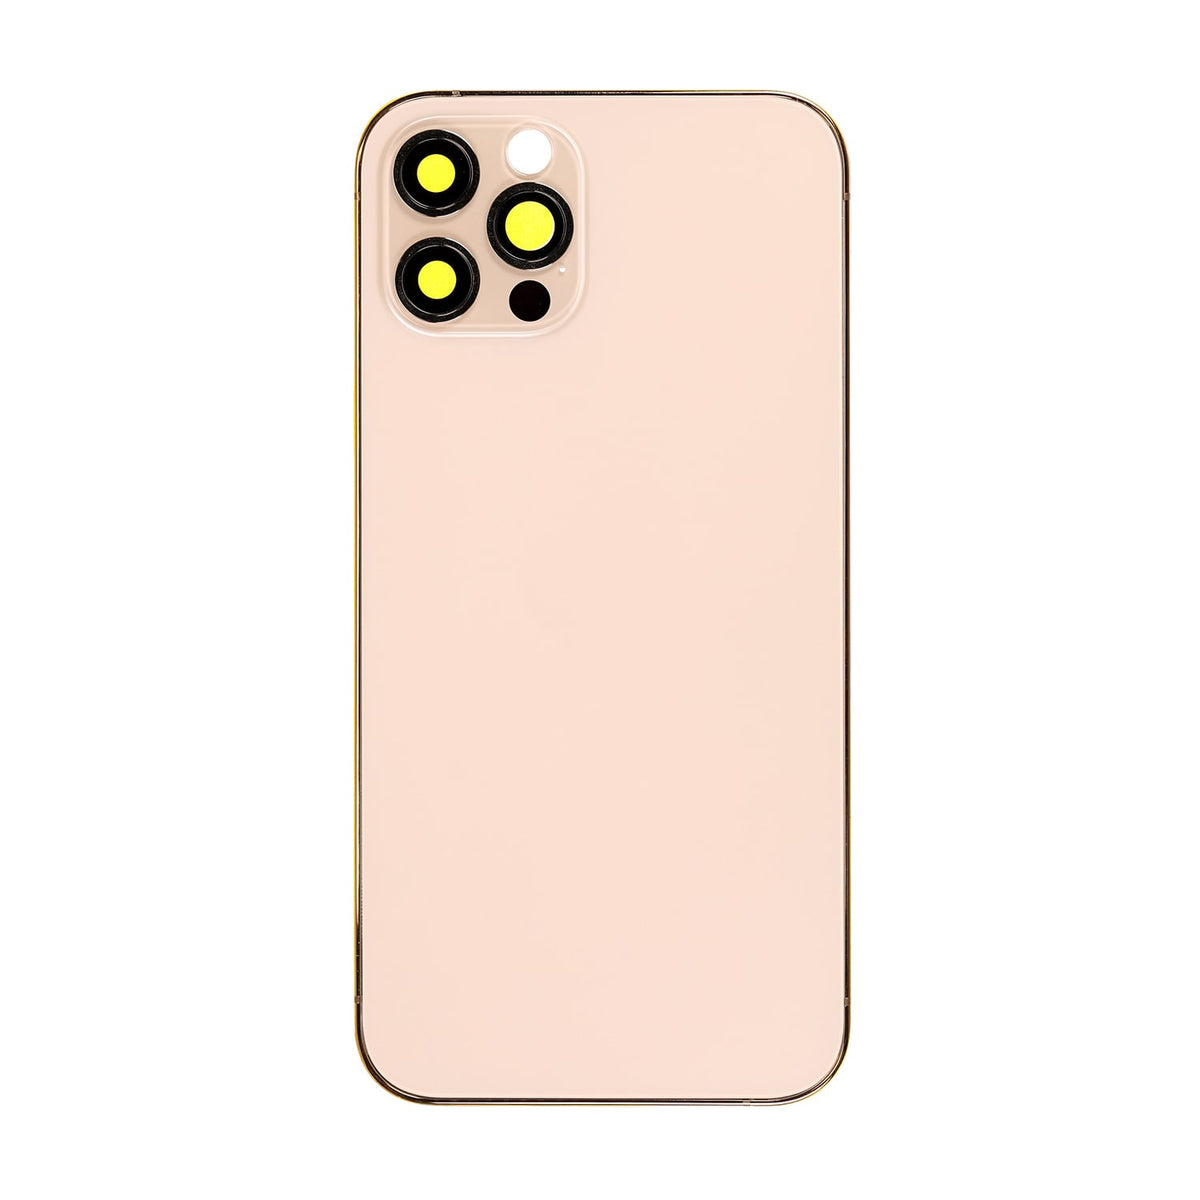 GOLD REAR HOUSING WITH FRAME FOR IPHONE 12 PRO